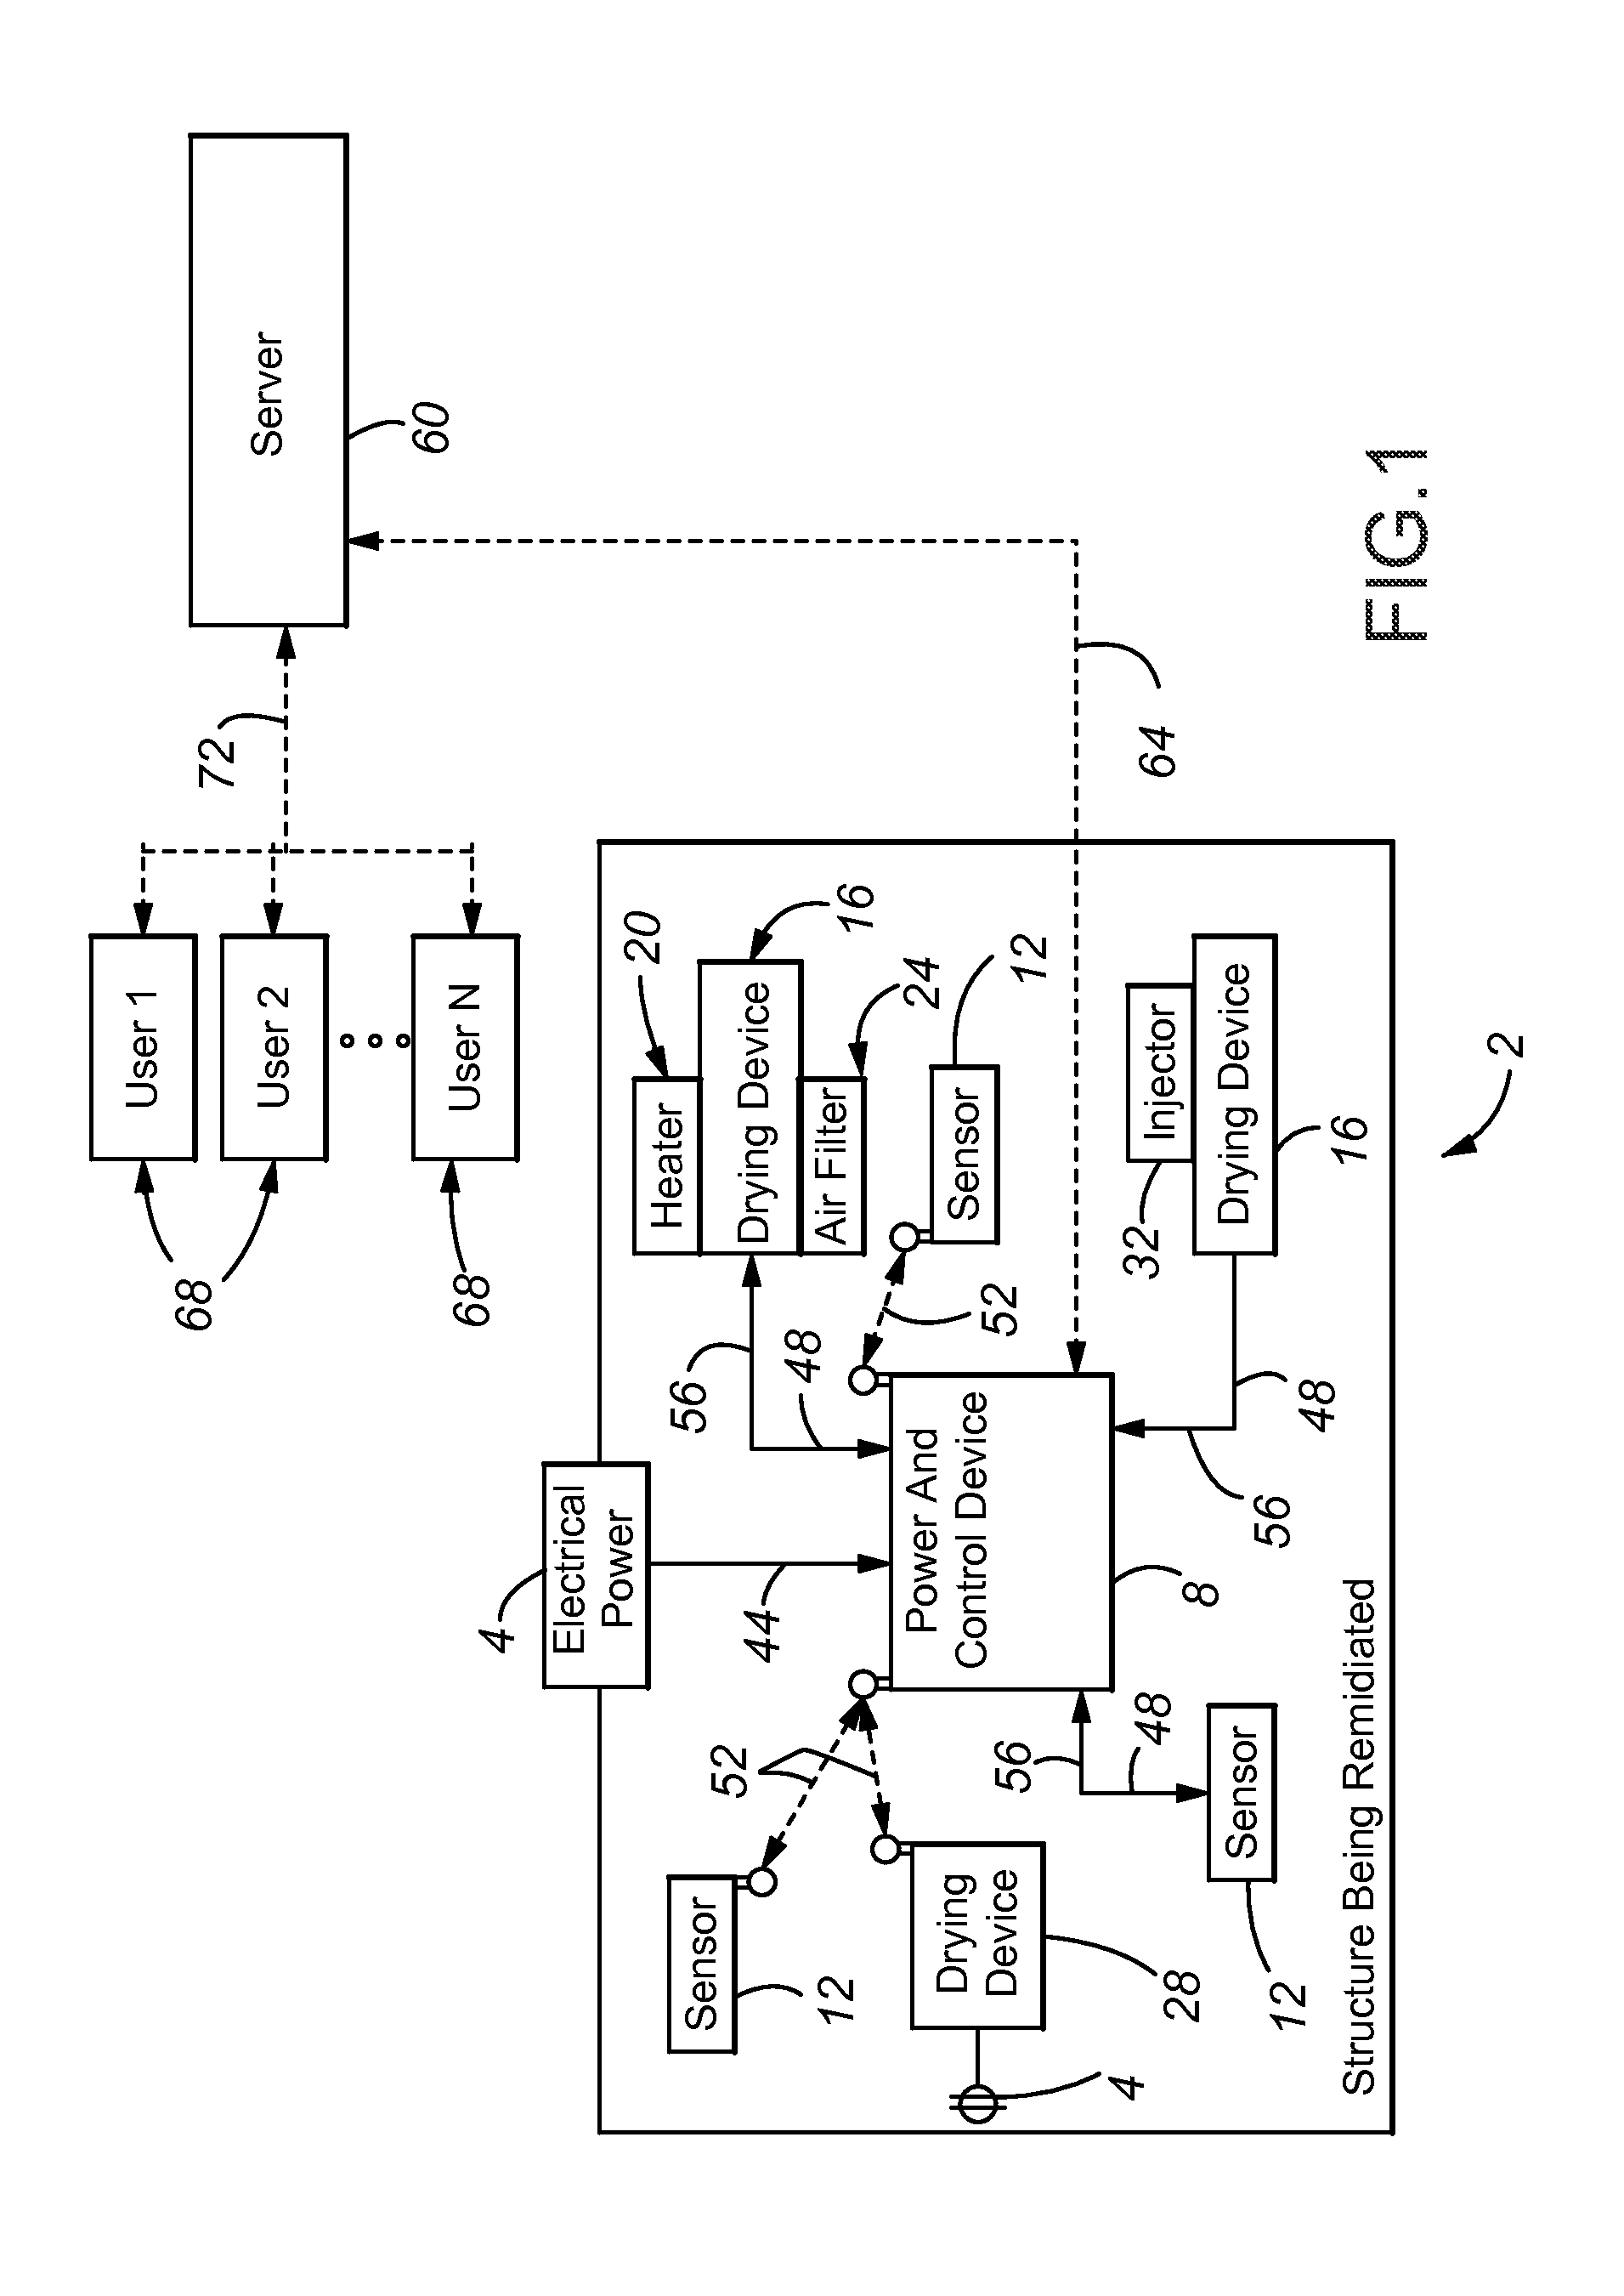 Integrated Water Damage Restoration System, Sensors Therefor, and Method of Using Same